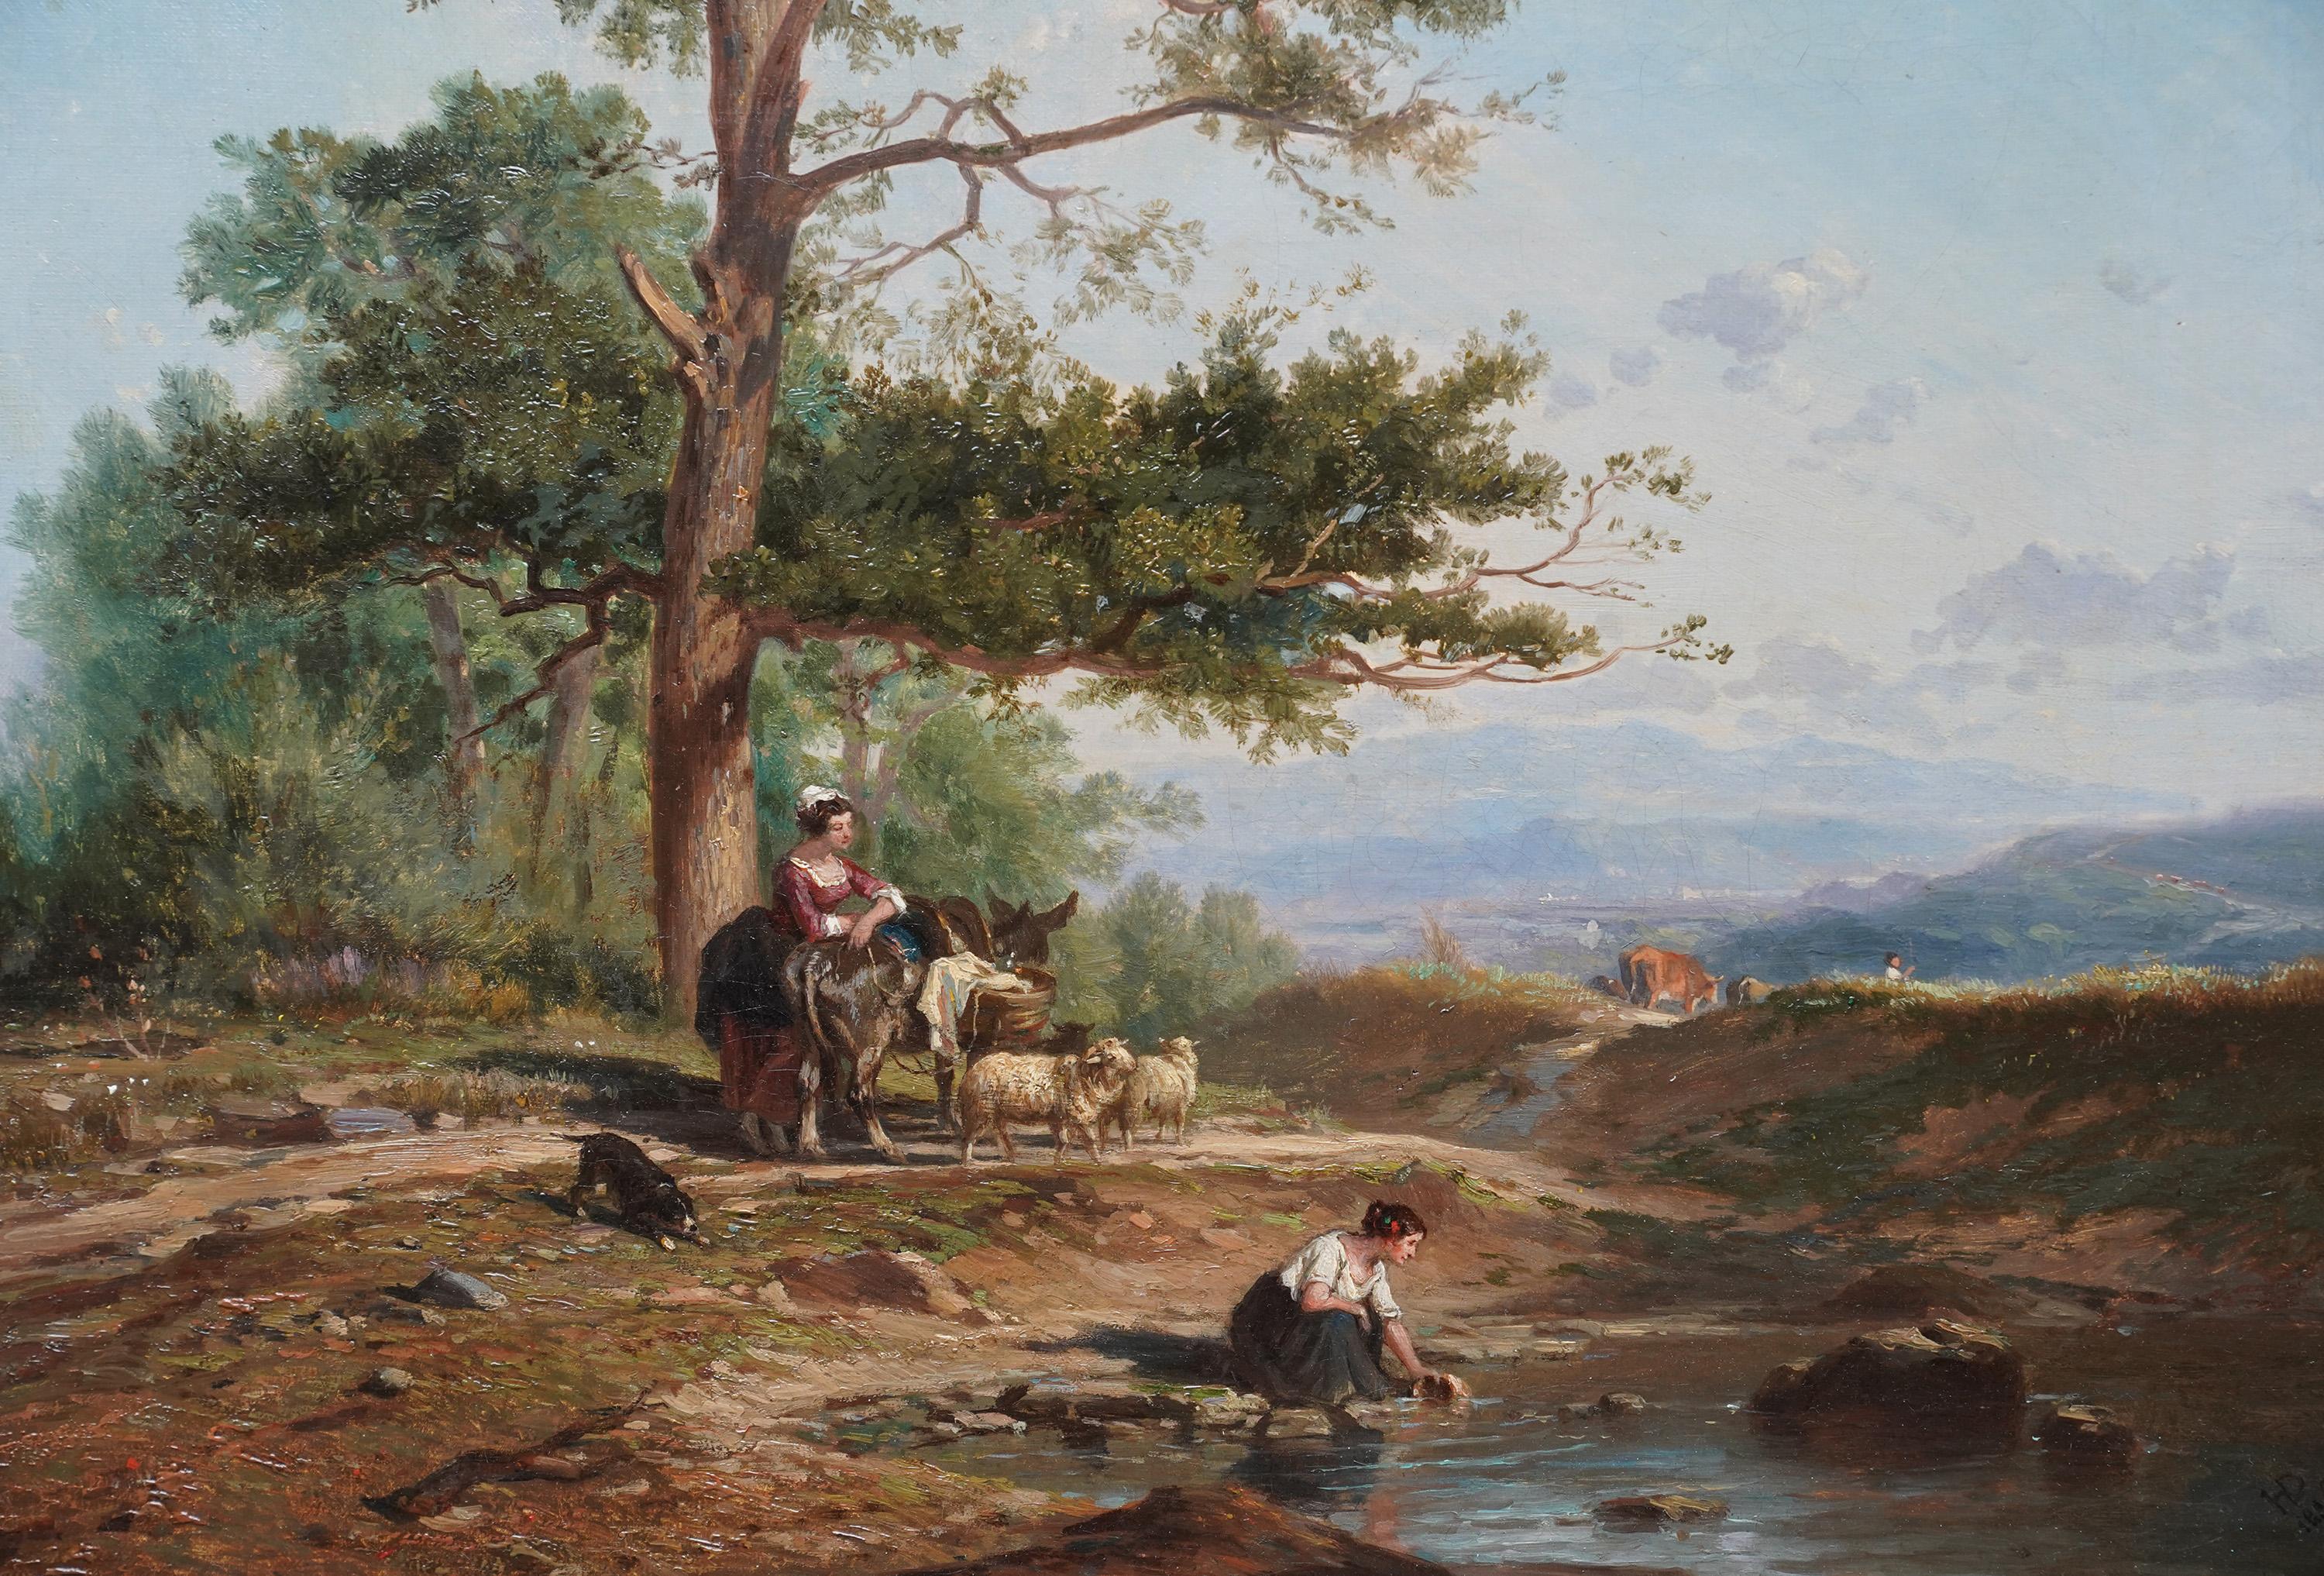 This charming Victorian landscape oil painting is by noted British artist Henry Dawson. It was painted circa 1850, when Dawson was working in London, producing some of his best works and exhibiting regularly at the Royal Academy and British